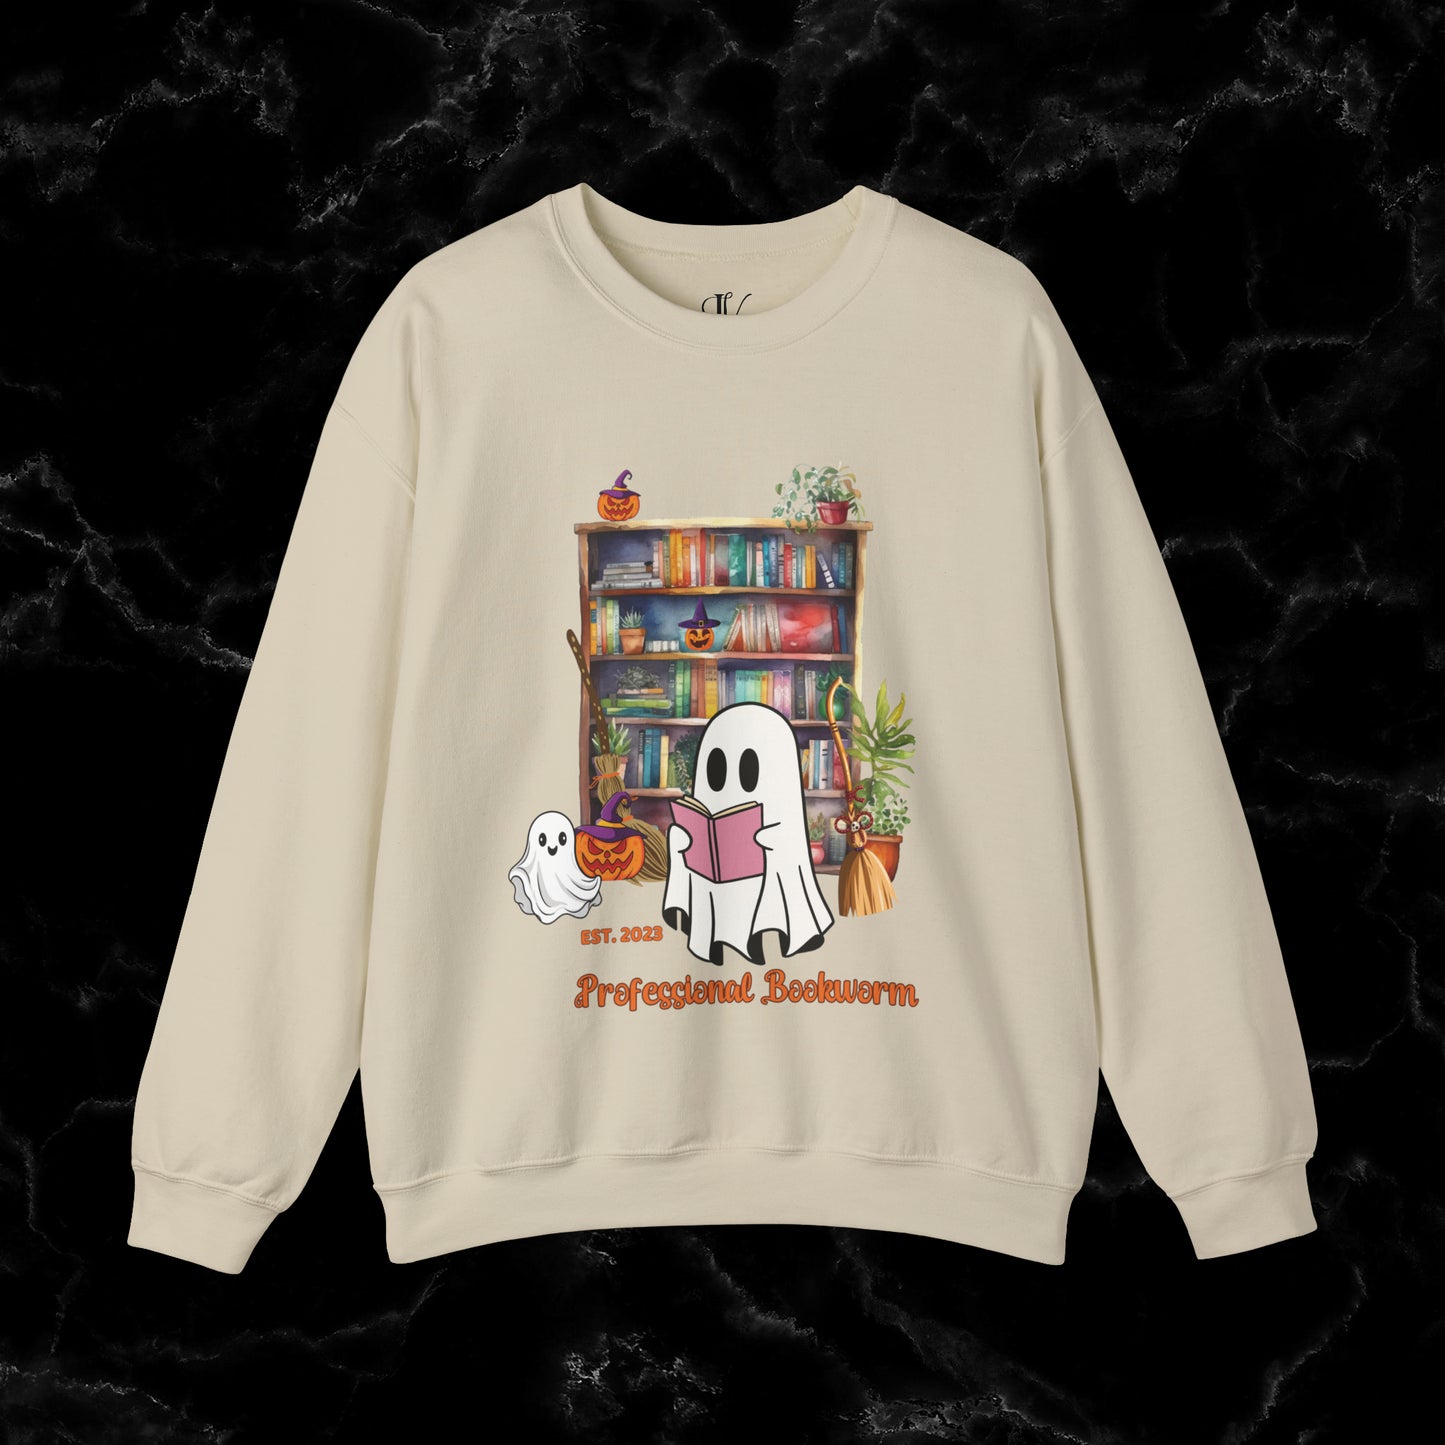 Witchy Gifts for Book Lover Cottagecore Pumpkin Witch Sweatshirt - Bookworm Back To School Reading Fall Sweater, Perfect Present for Bookworm Aunt's Birthday Sweatshirt S Sand 